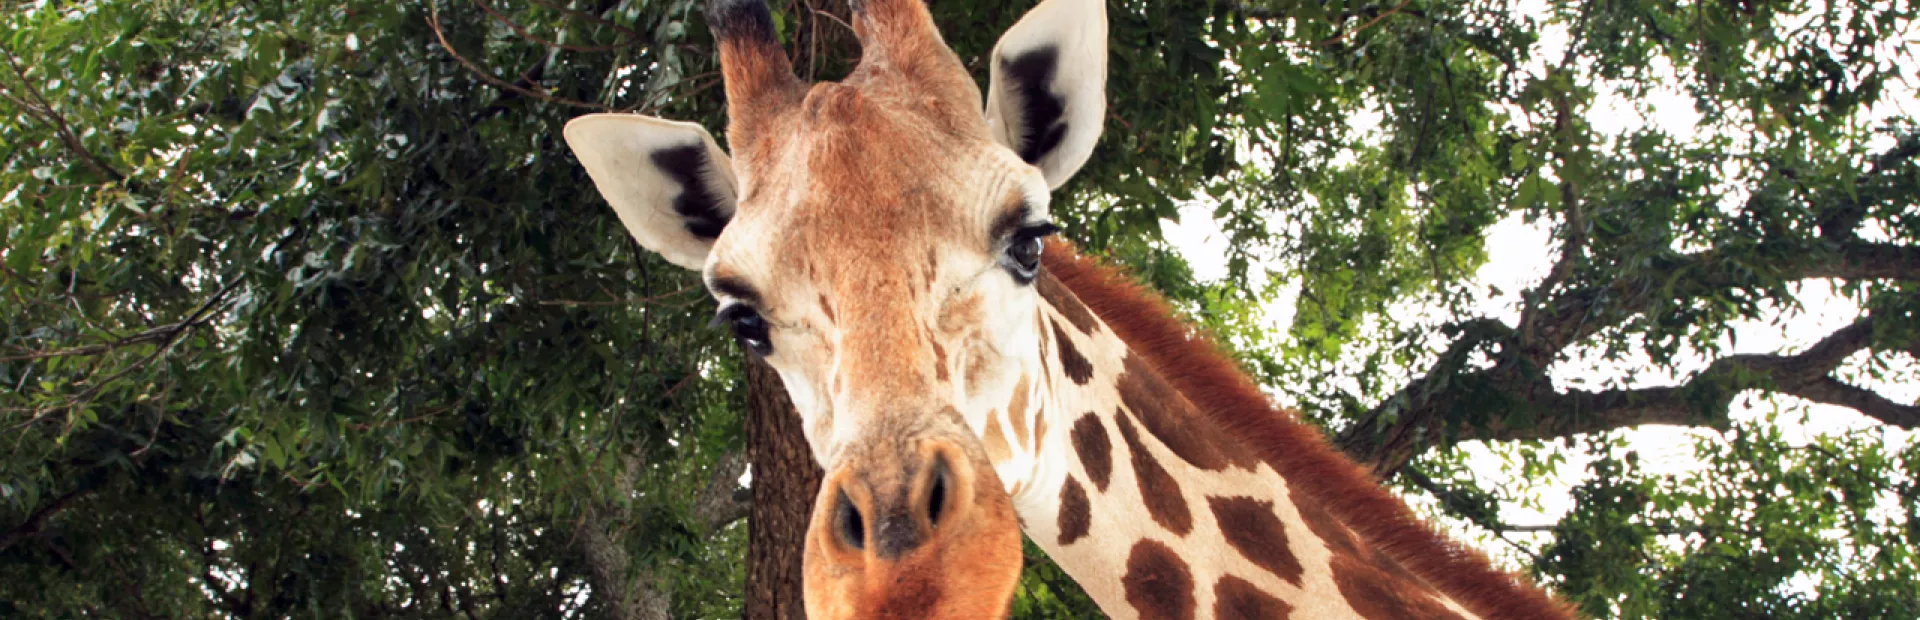 Giraffes have high blood pressure. Why don’t they drop dead?